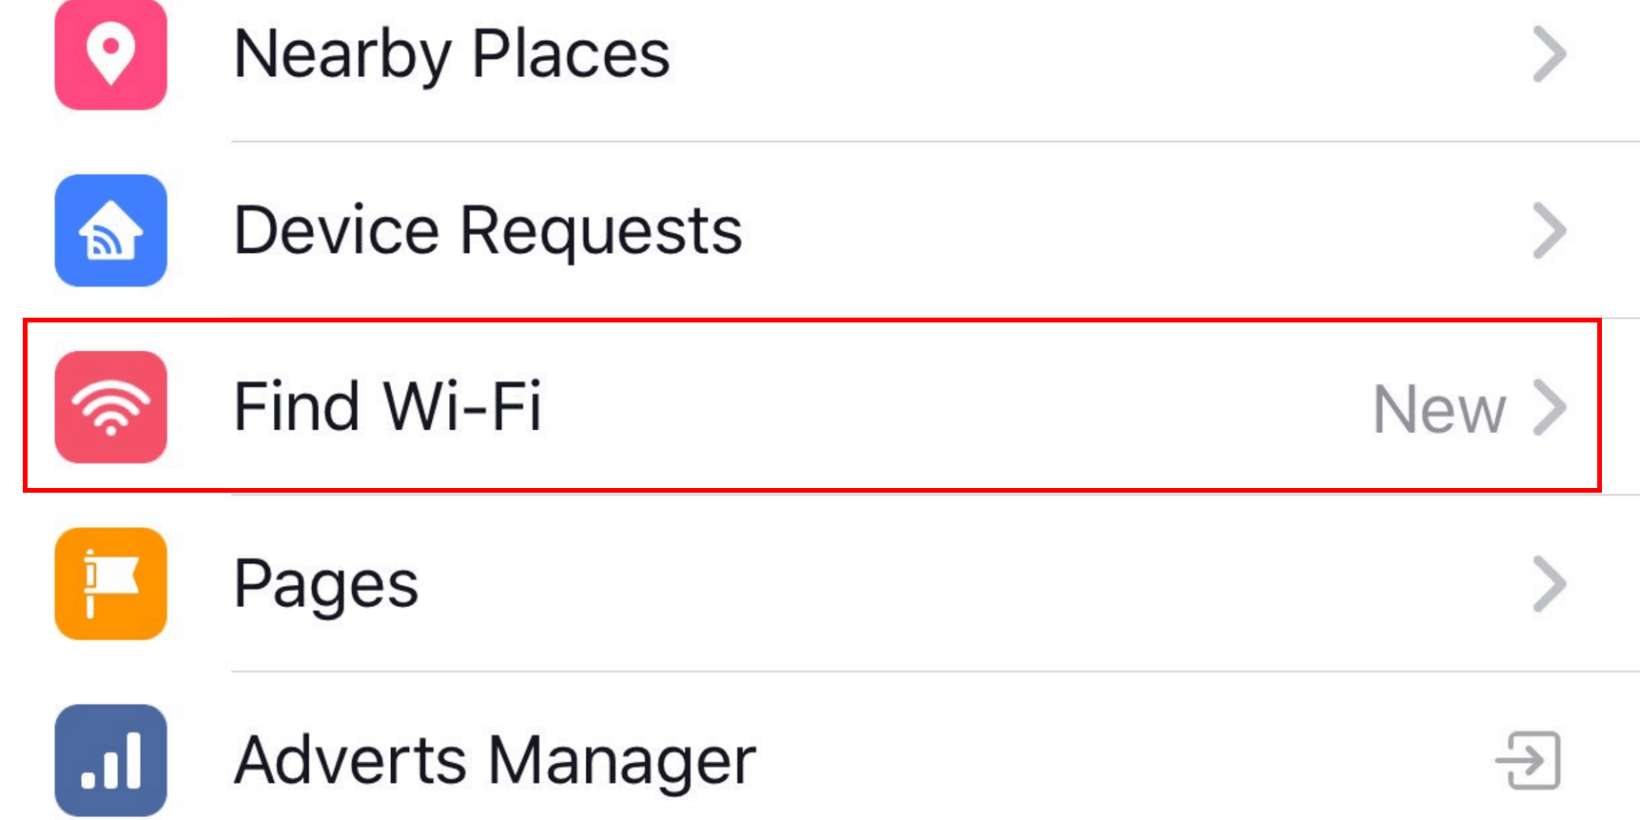 New Facebook feature lets you find nearby Wi-Fi